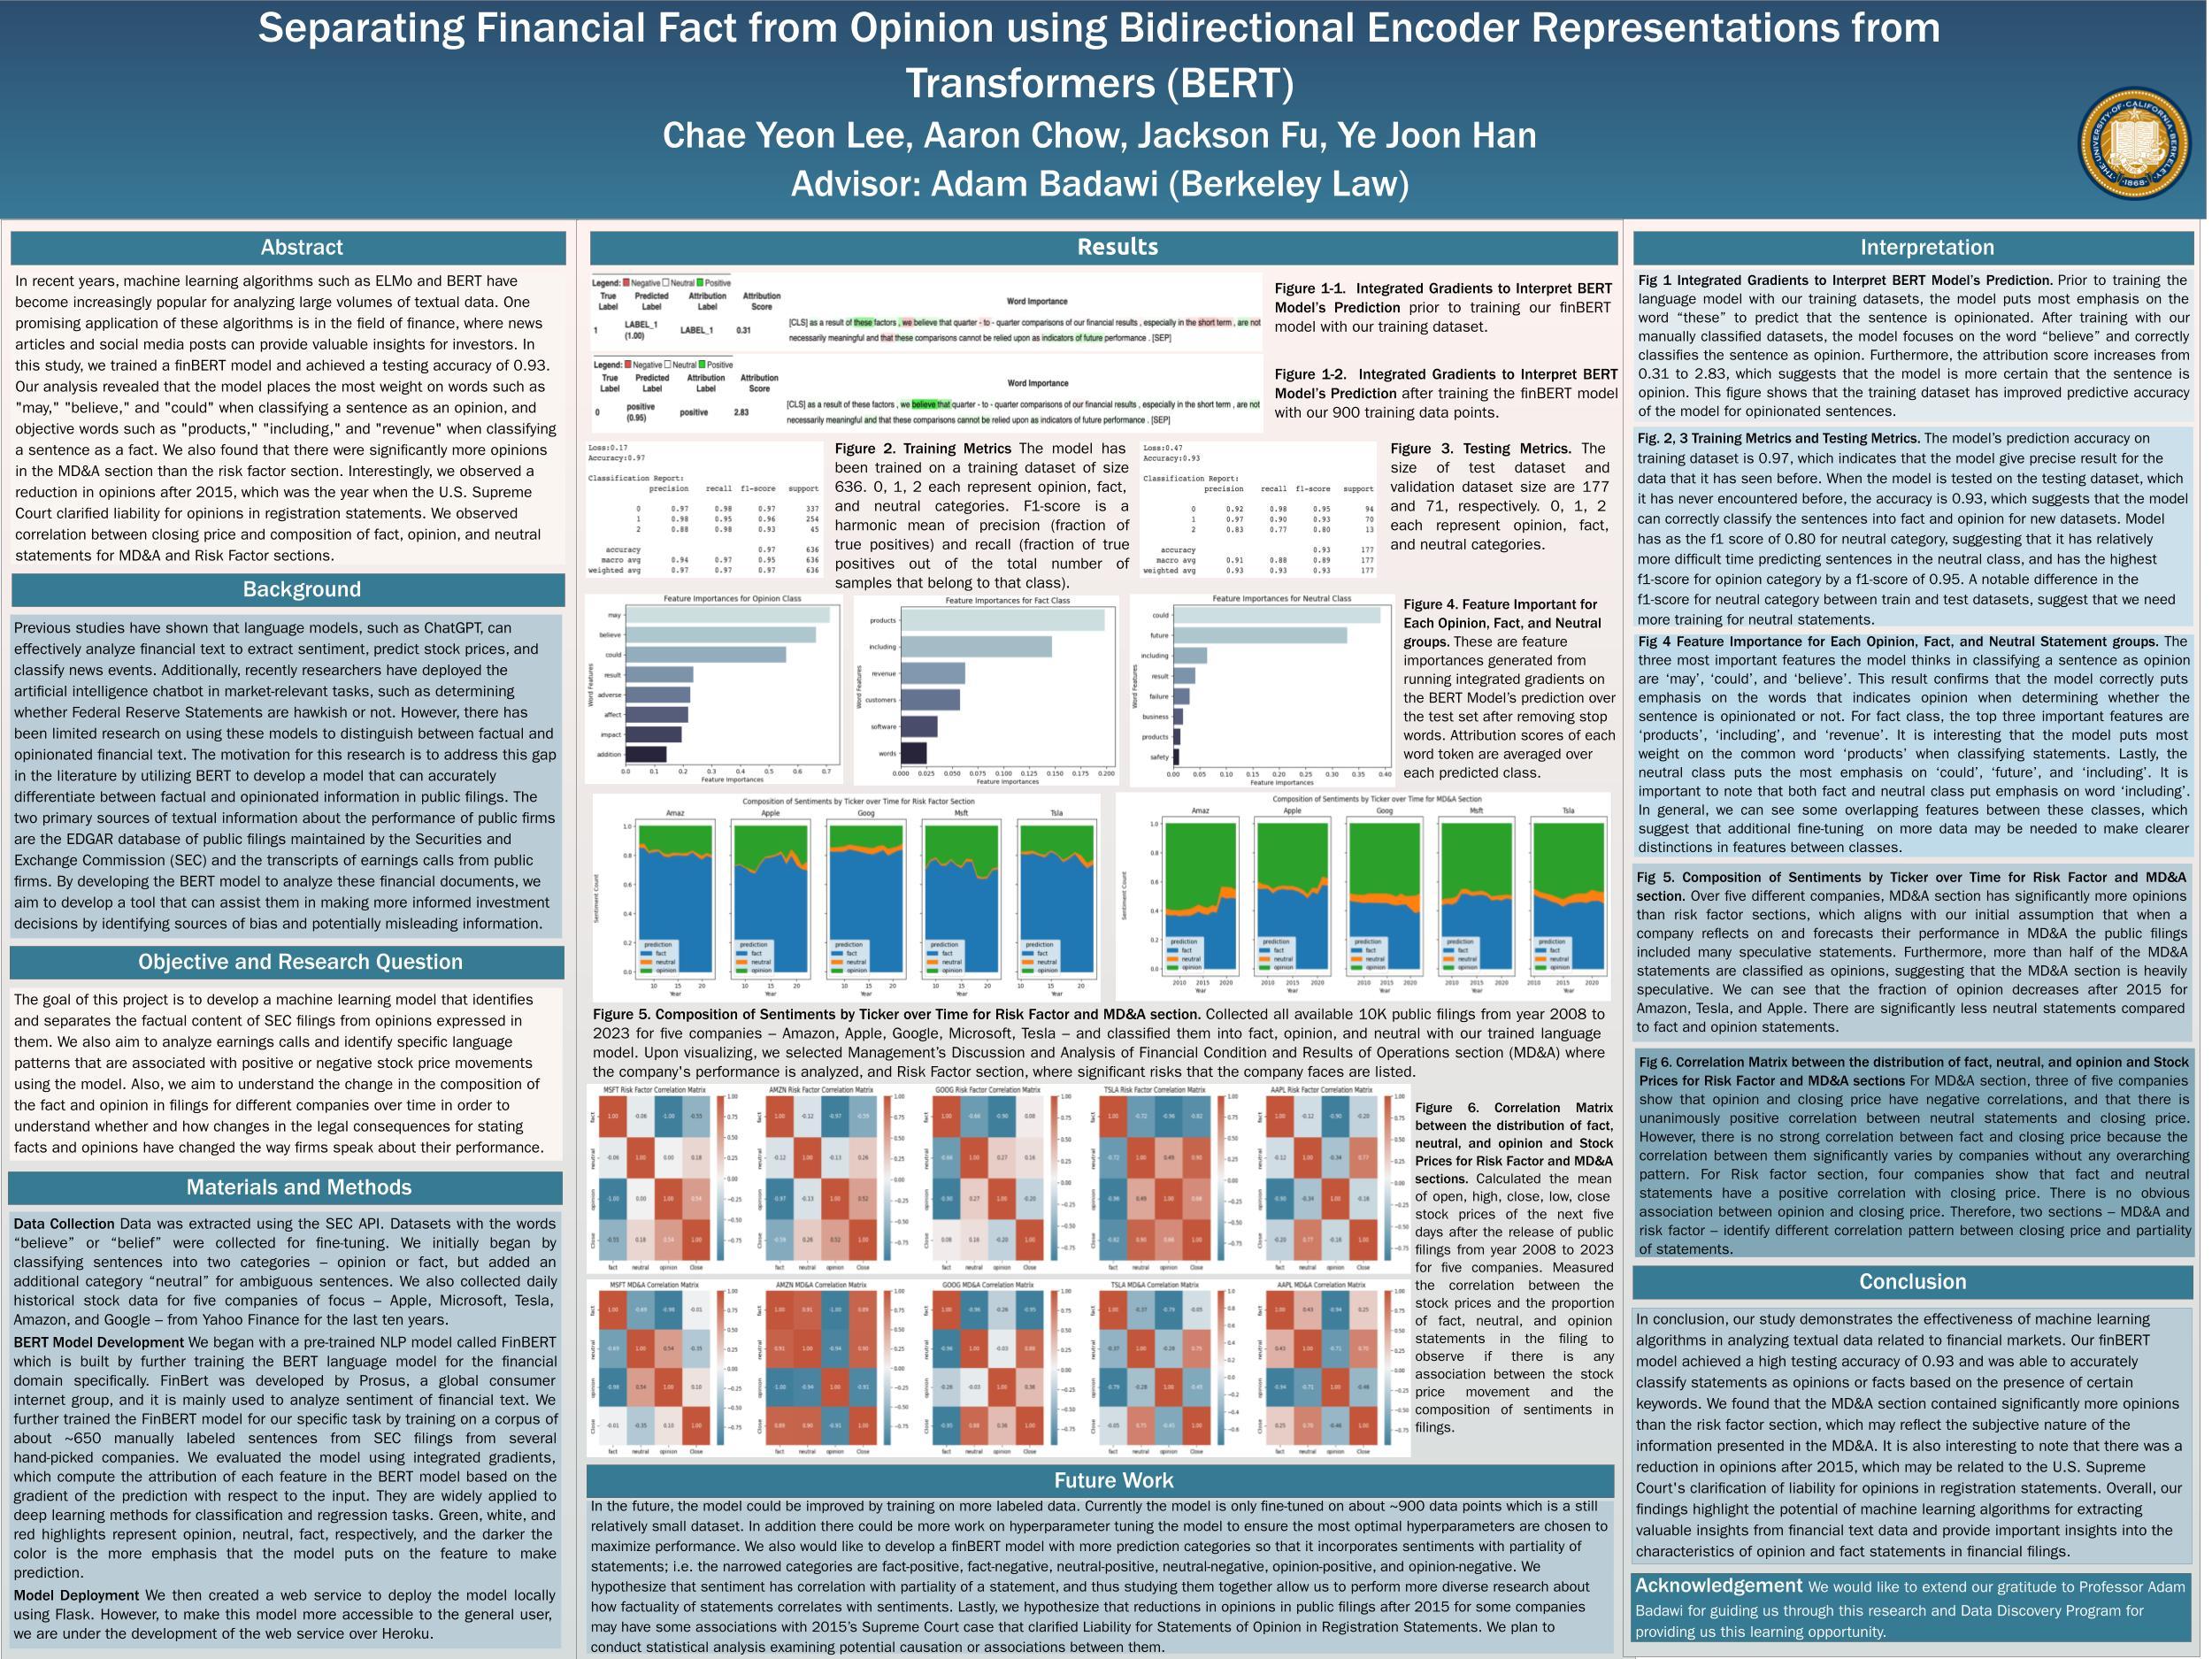 Separating Financial Fact from Opinion using Bidirectional Encoder Representations from Transformers (BERT) - Spring 2023 Discovery Project